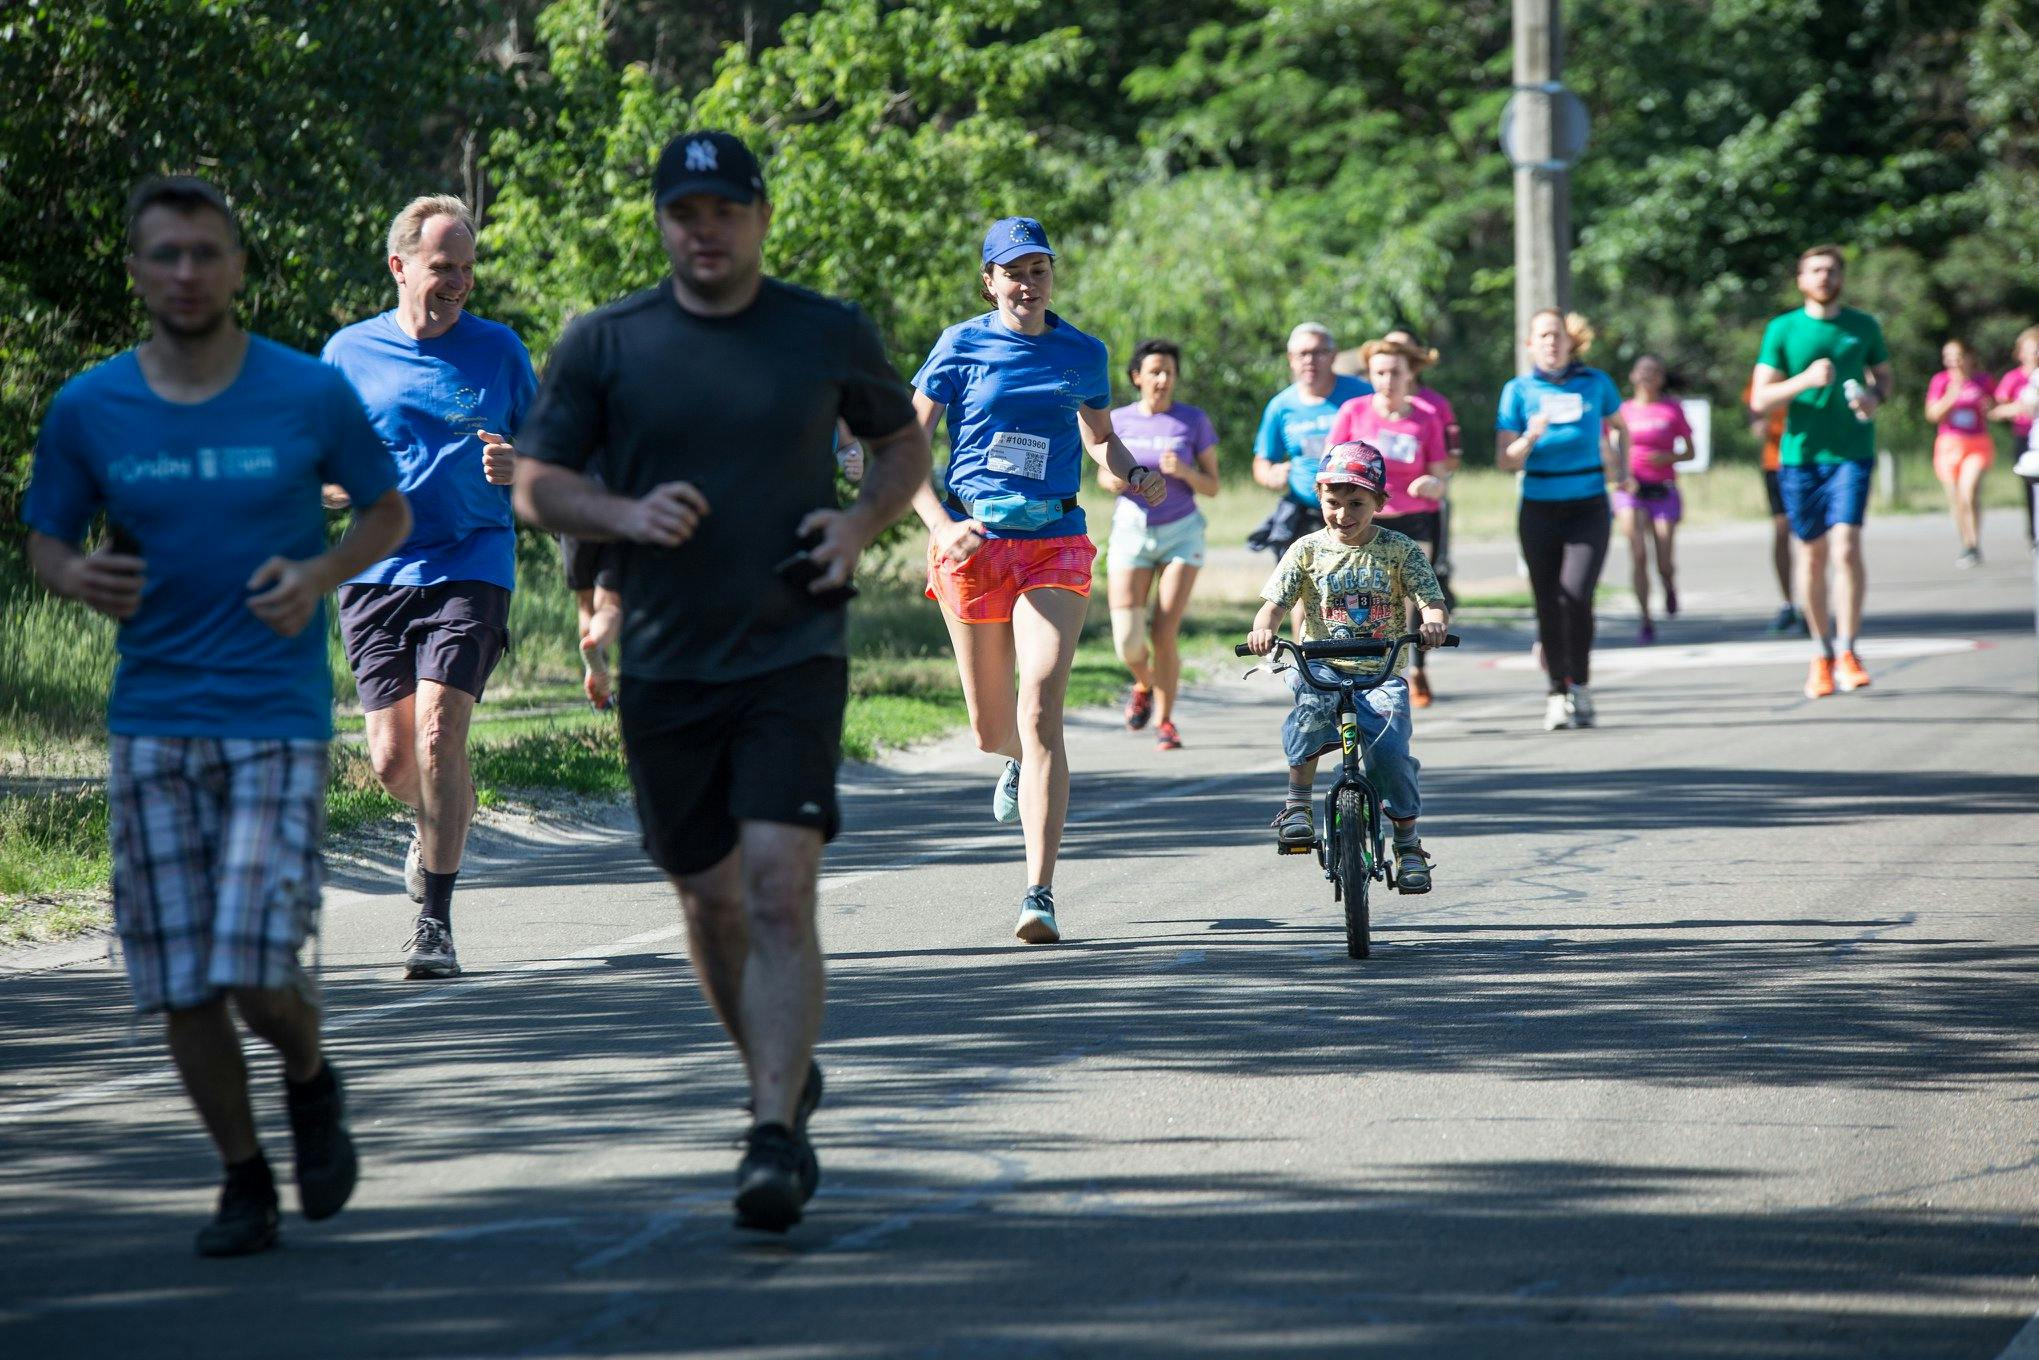 In the picture: participants of the Runday race during a 5 km run, adults are running, a boy is riding a bicycle next to his mother